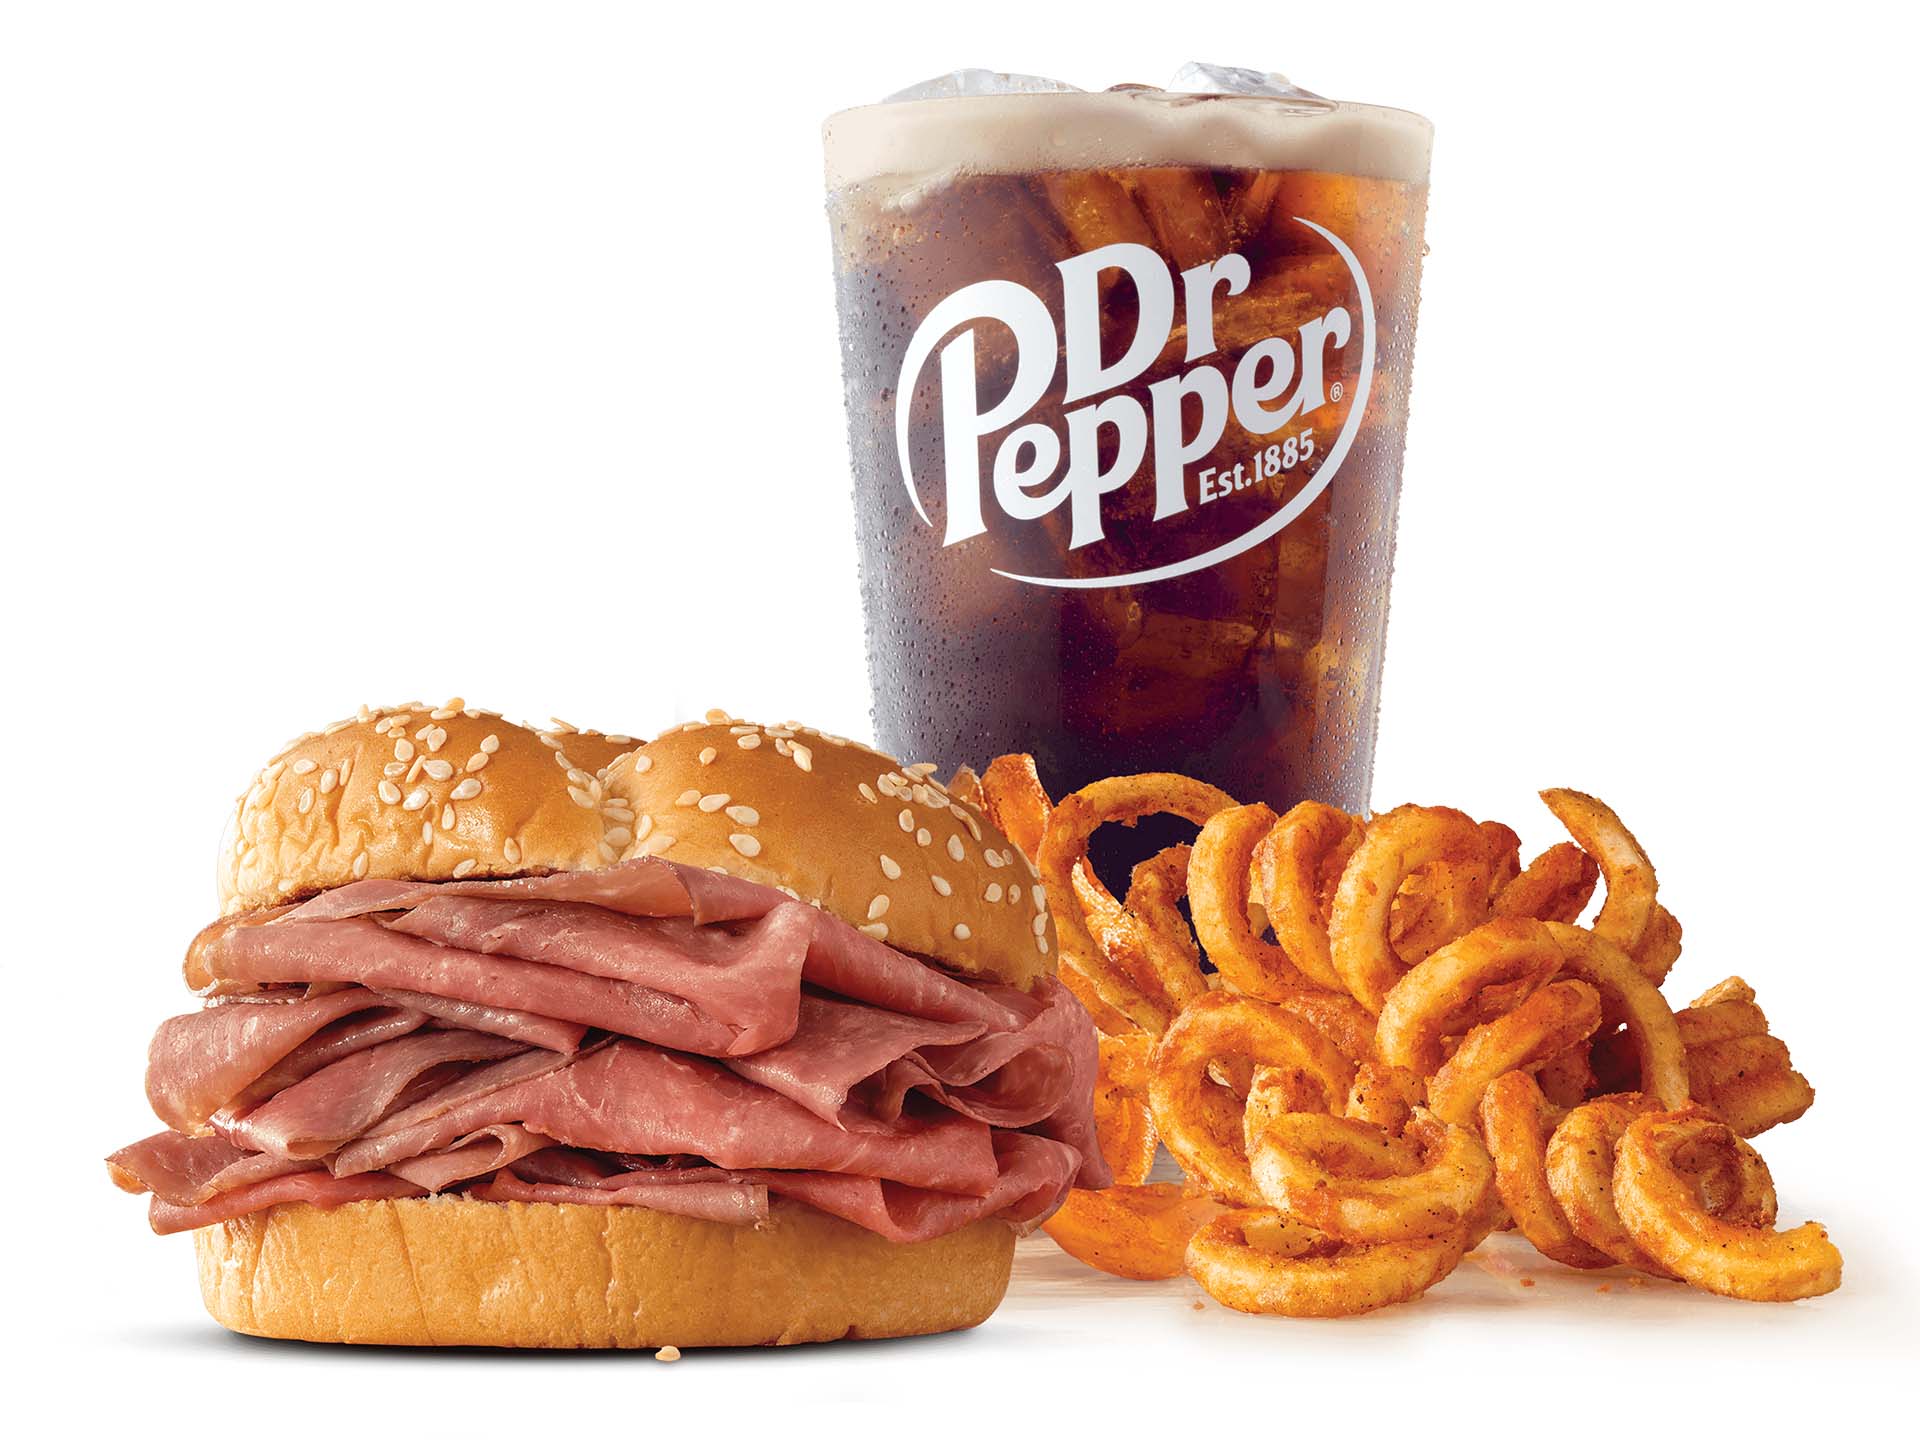 Arby's classic roast beef meal in Saint Cloud, MN